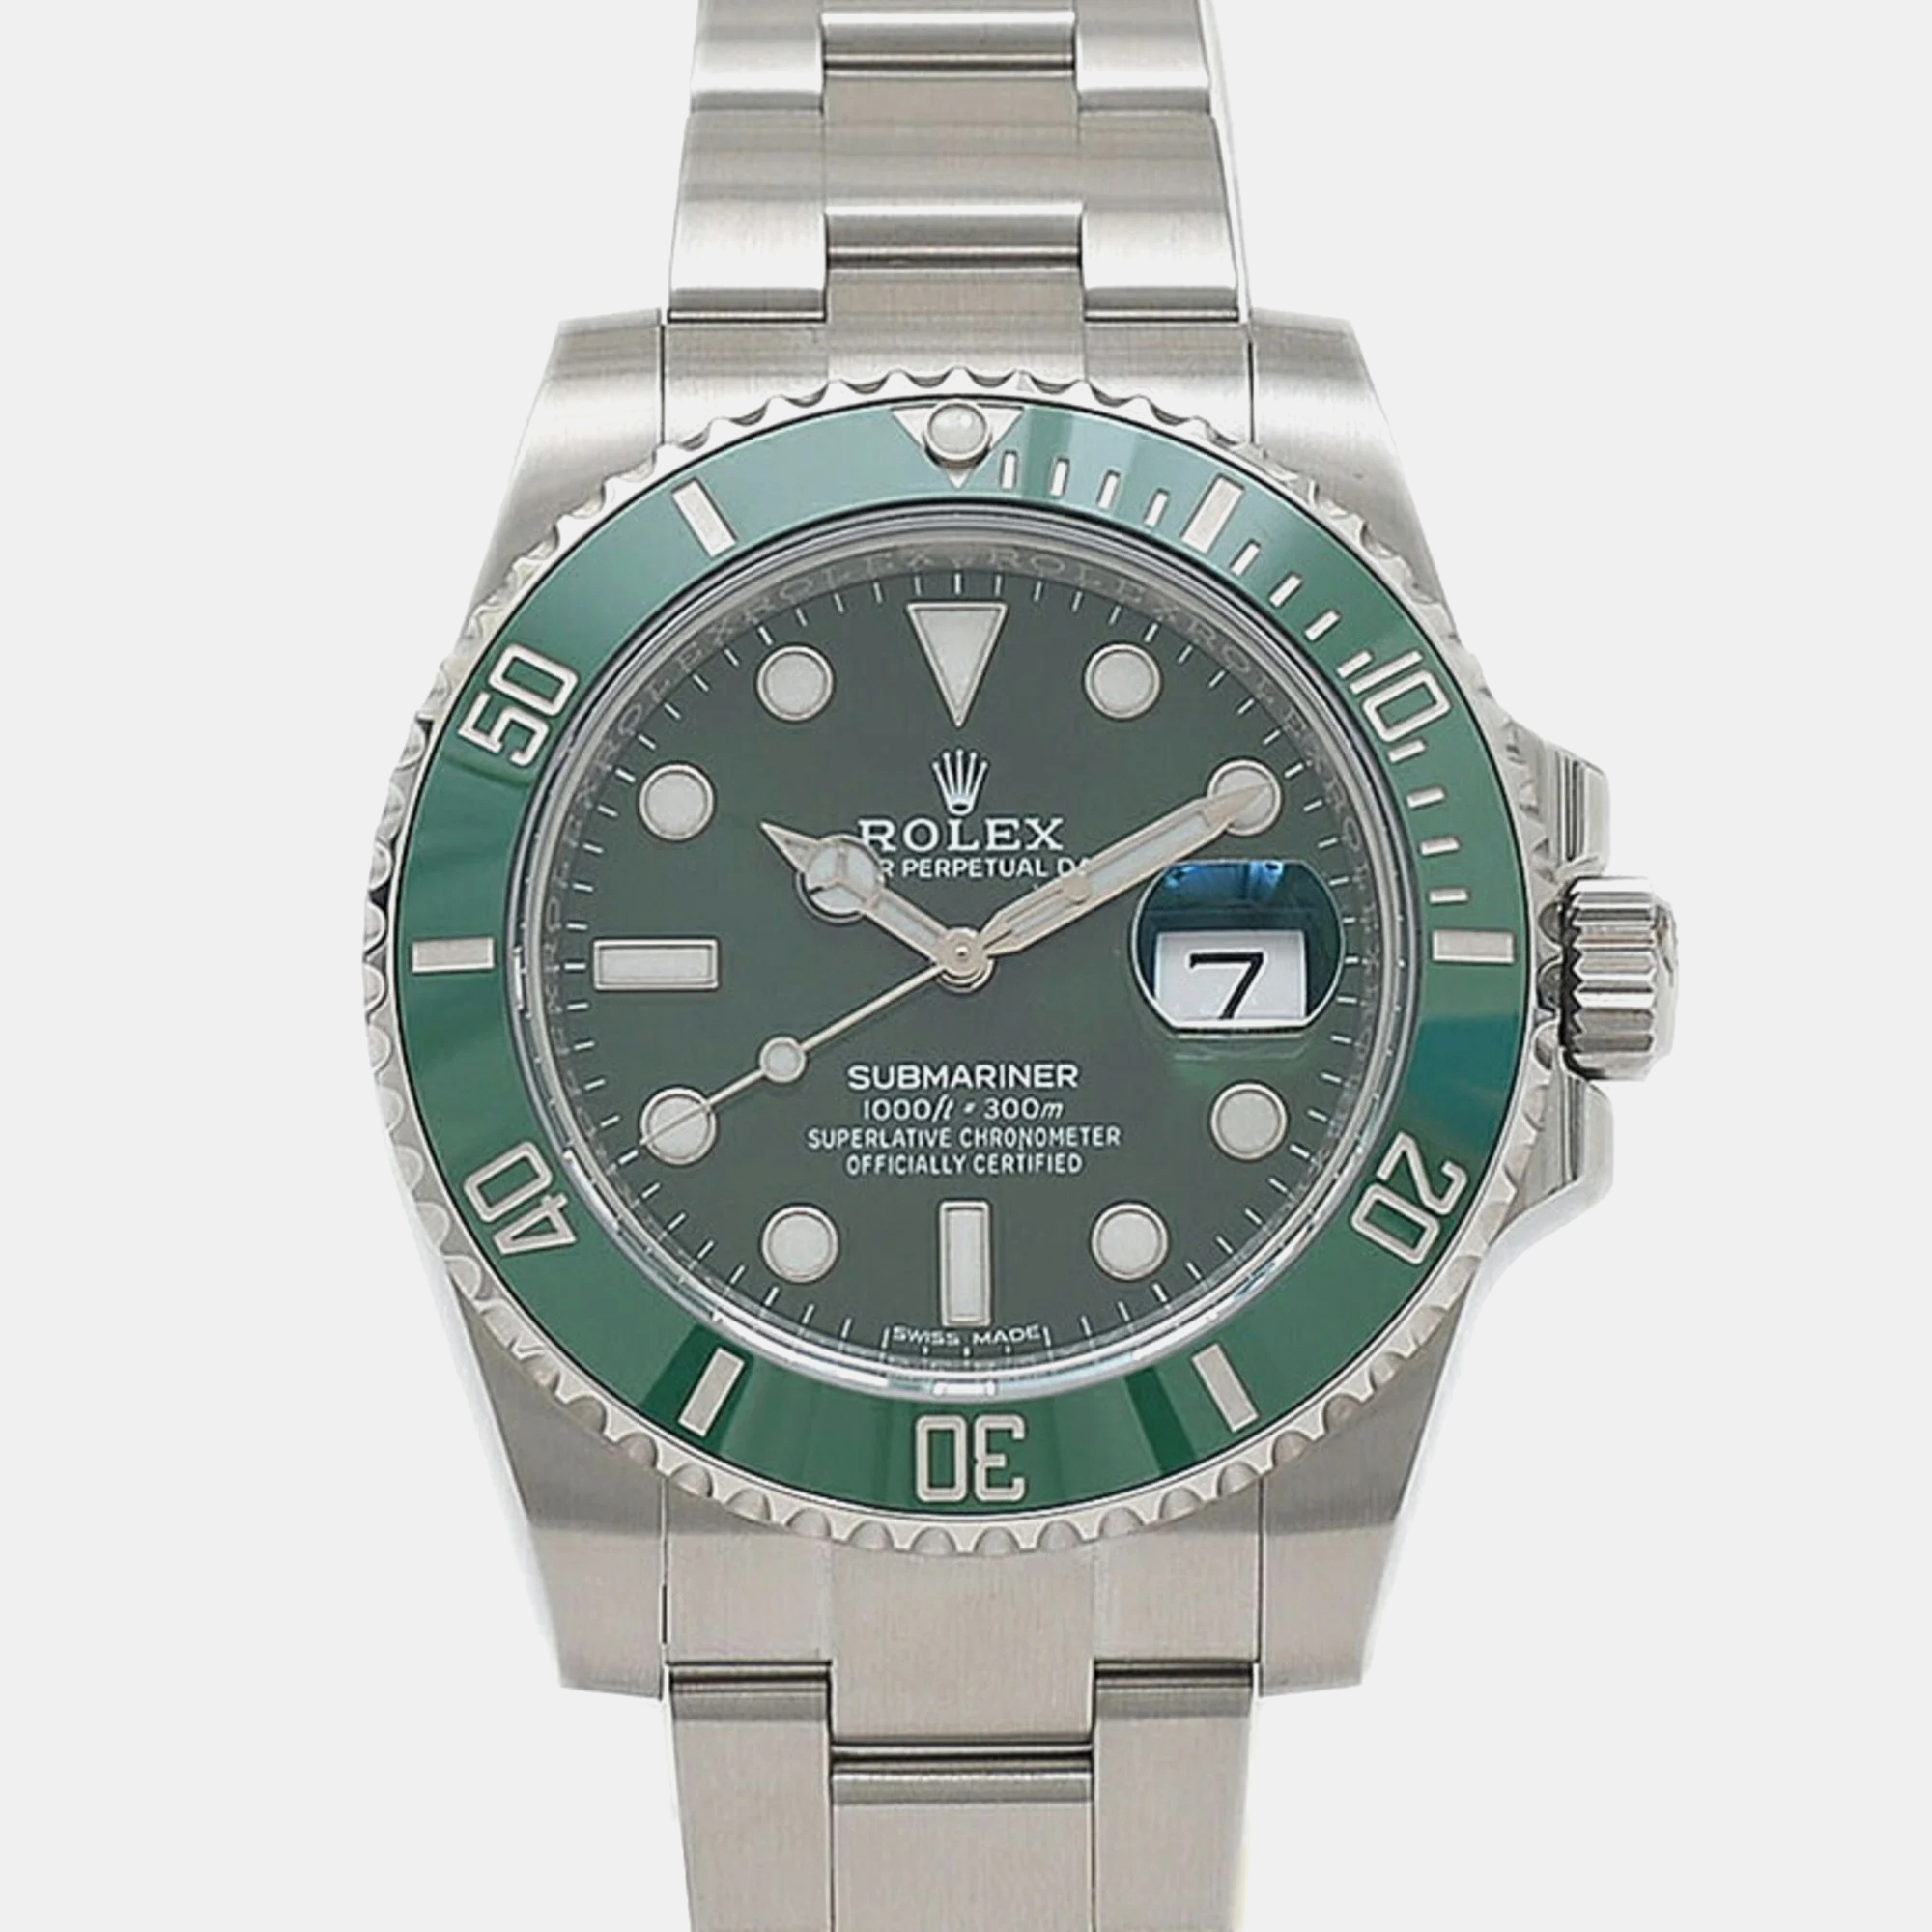 Rolex green stainless steel submariner 116610lv automatic men's wristwatch 40 mm